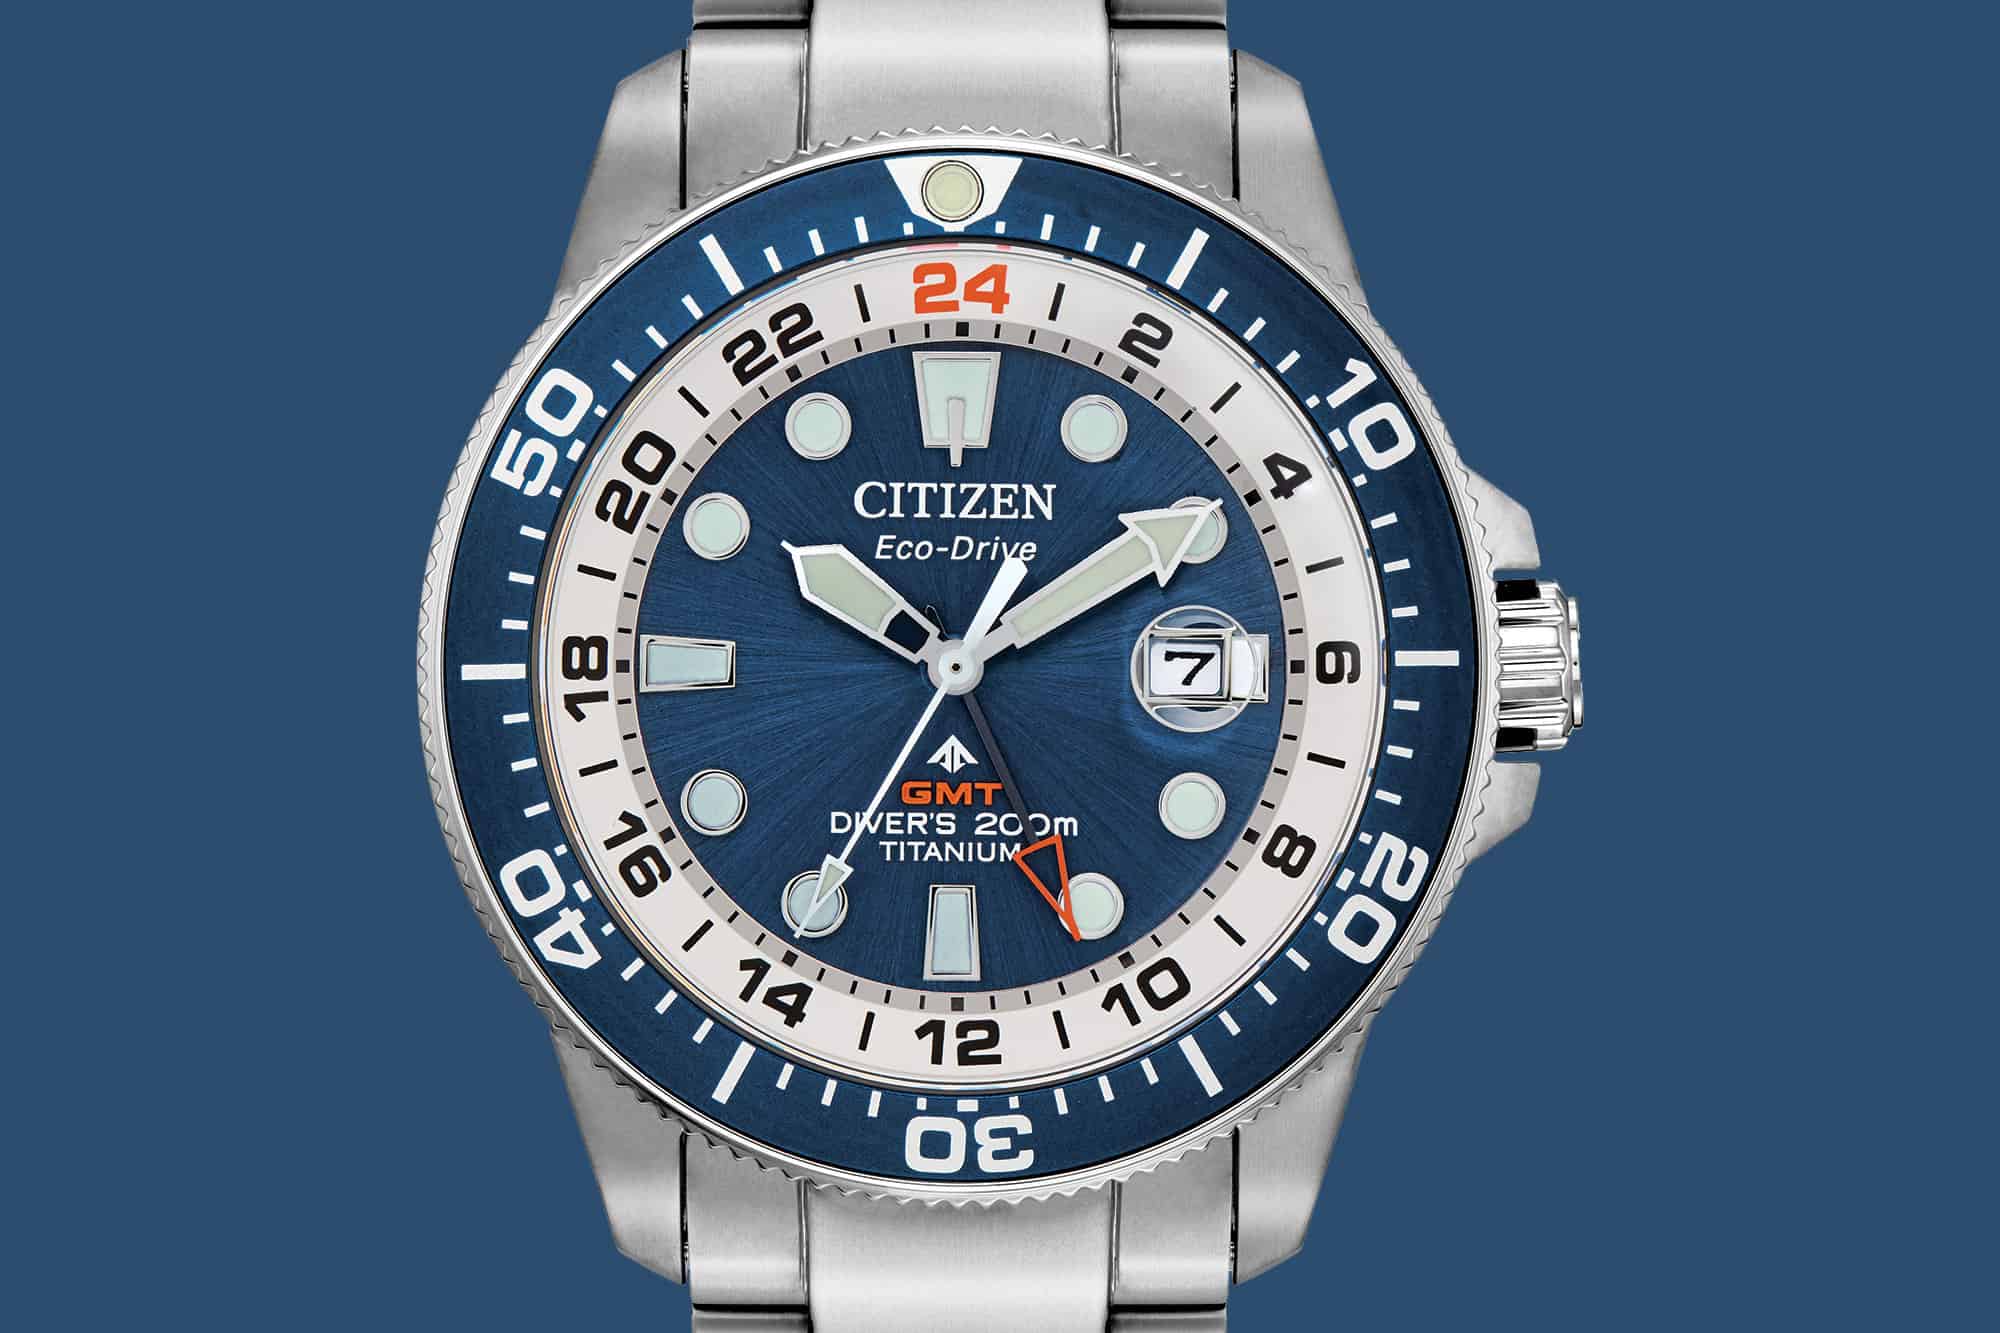 Introducing New Watches from Citizen and Bulova, Part of the Macy's Watch  Drop, Now Live - Worn & Wound